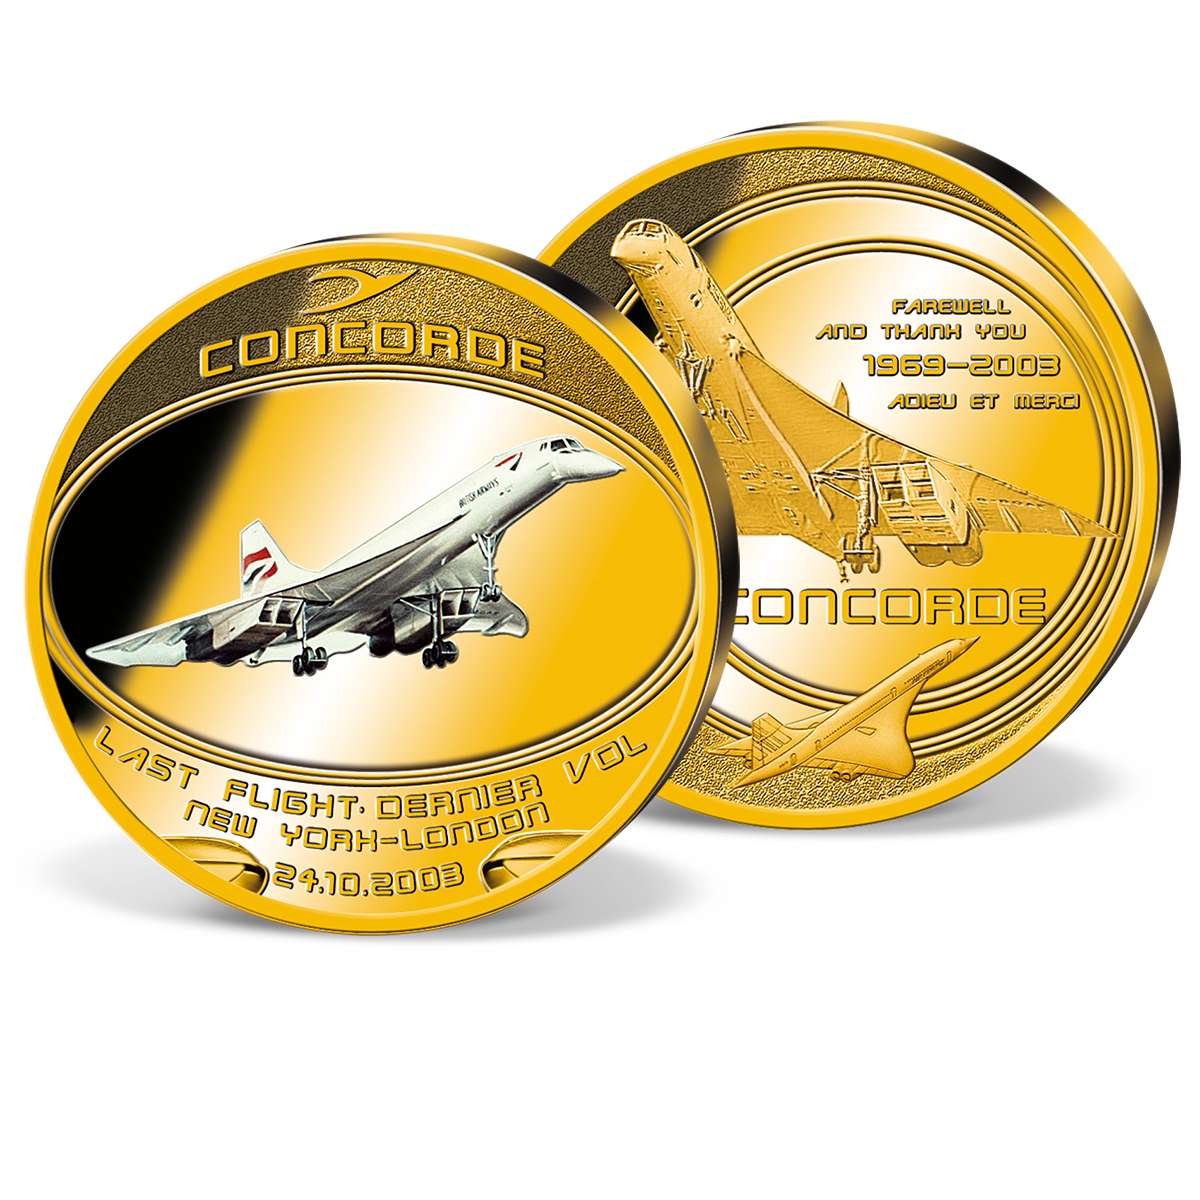 Last Flight of ConcordeThe World's First Supersonic Airliner Gold Plated Coin 